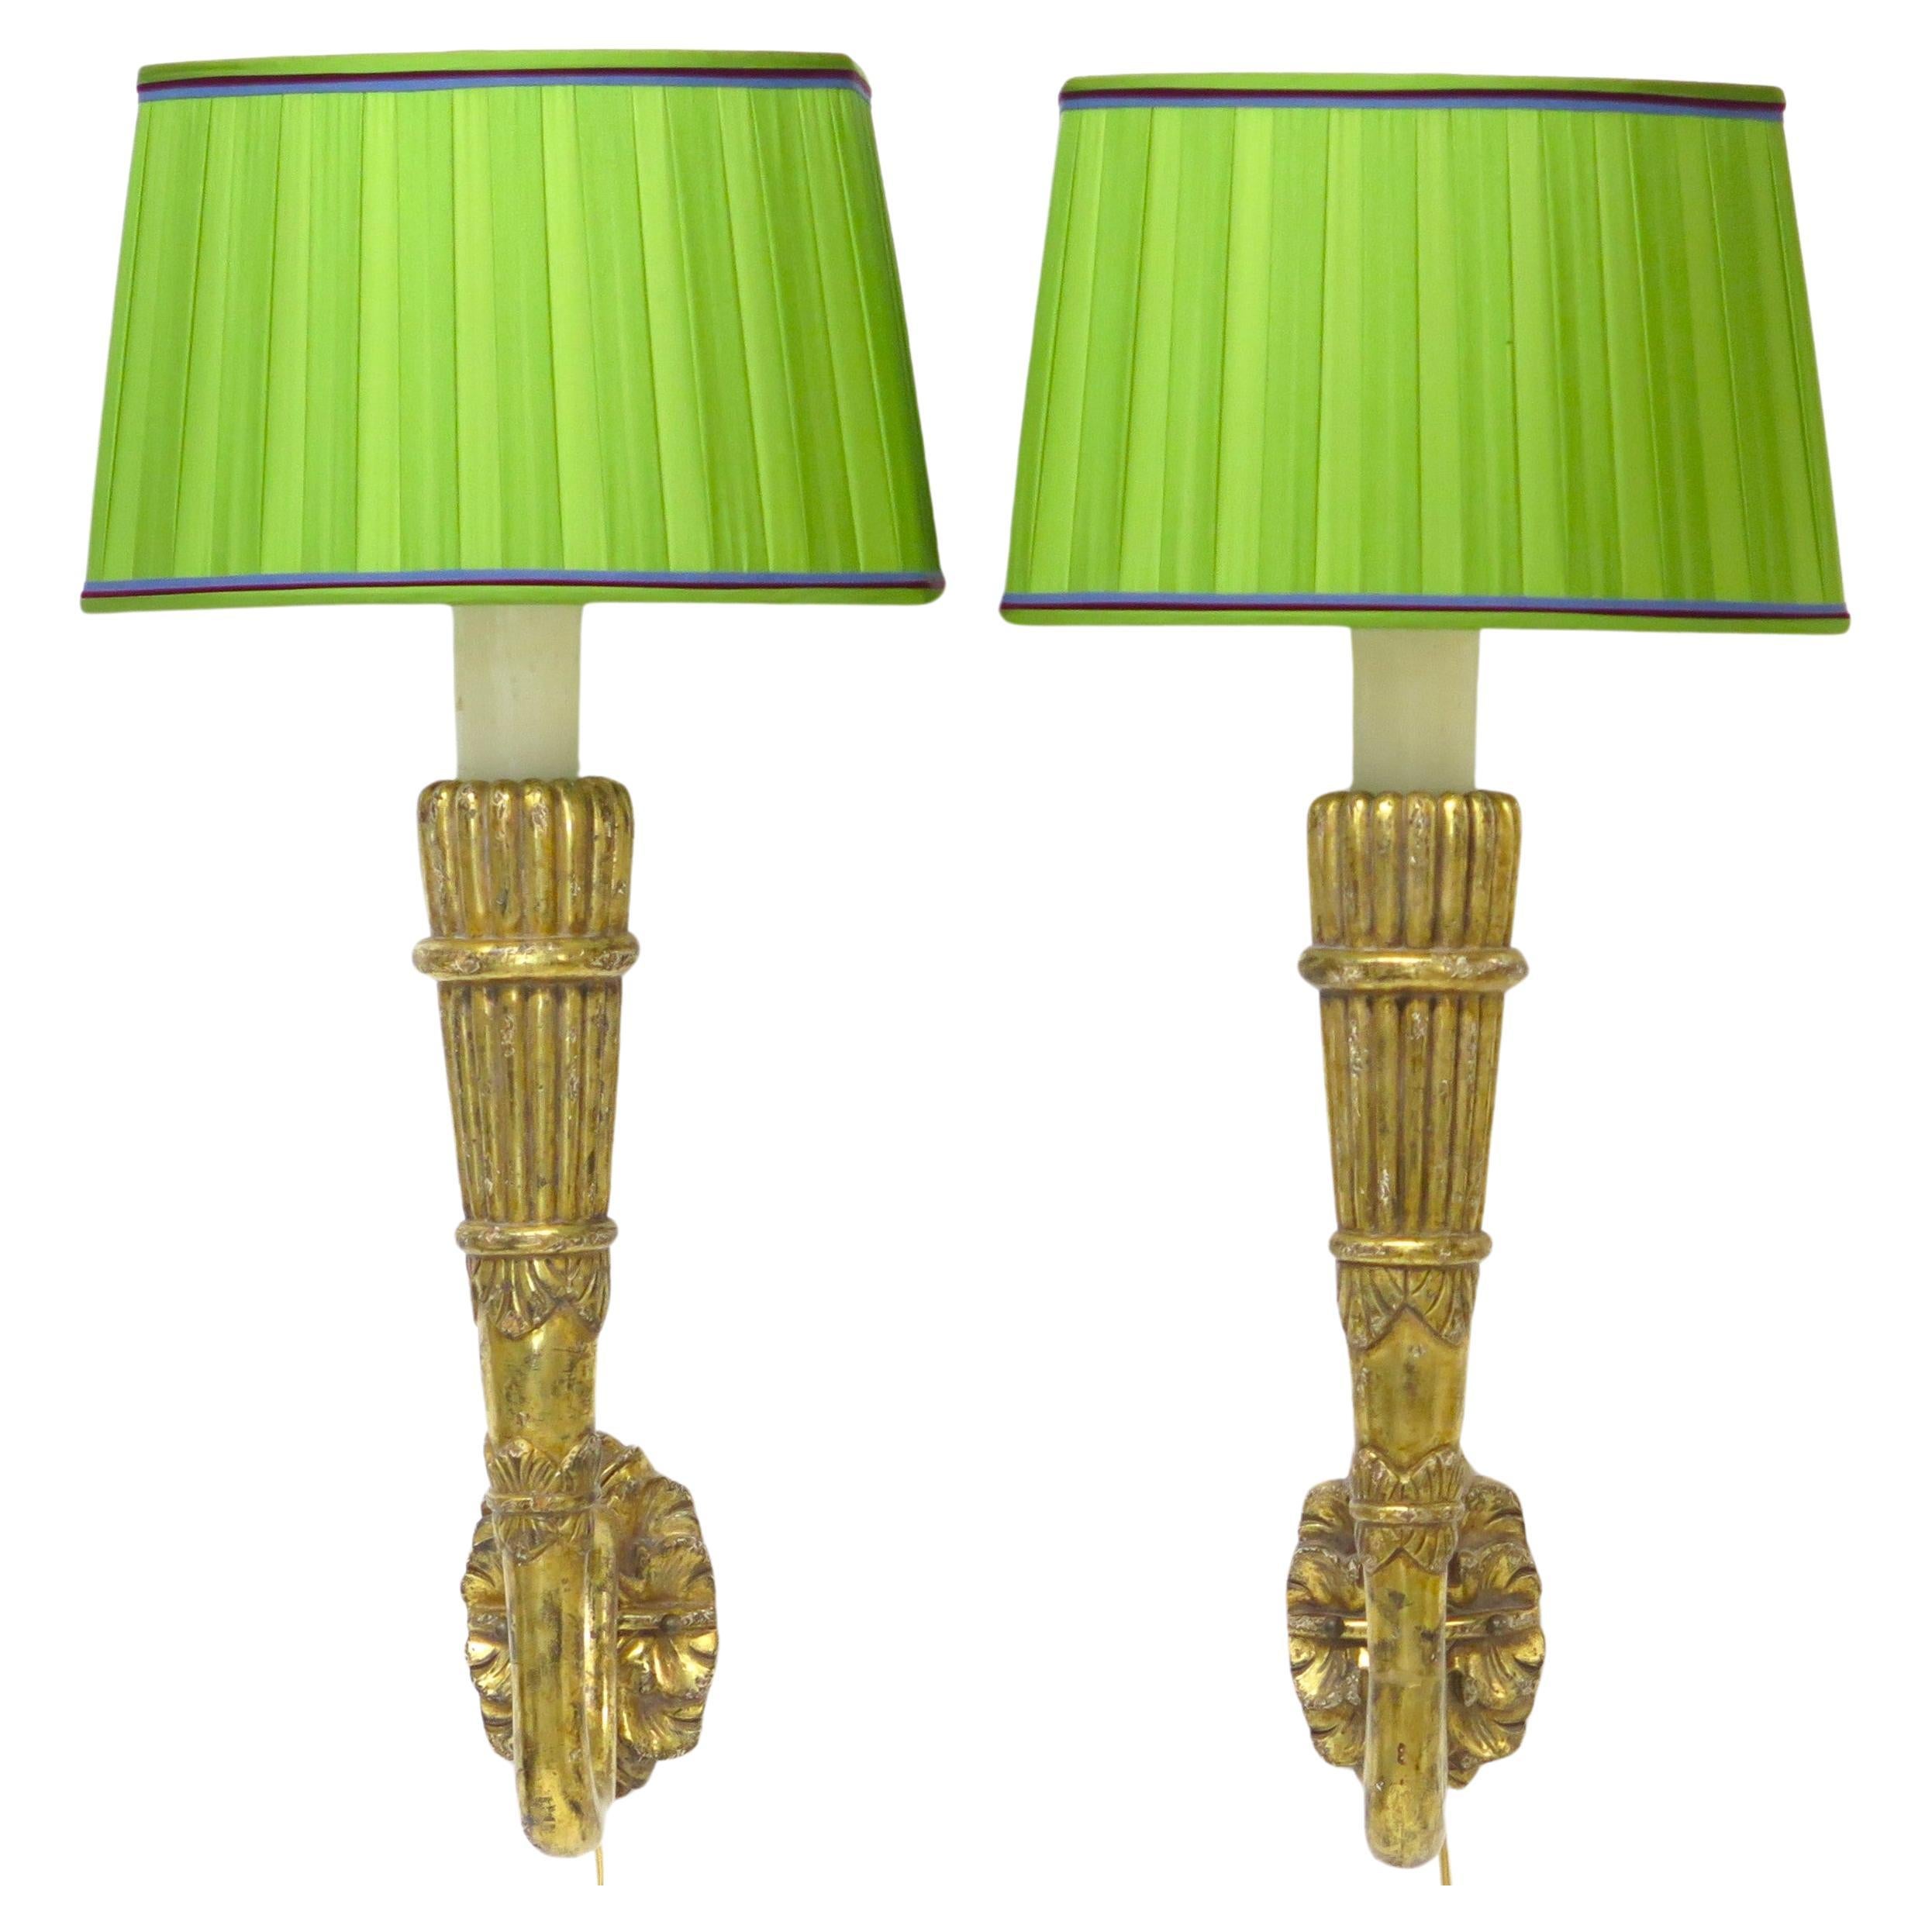 Pair of Art Deco Giltwood Sconces in the Form of Stylized Wall Torches For Sale